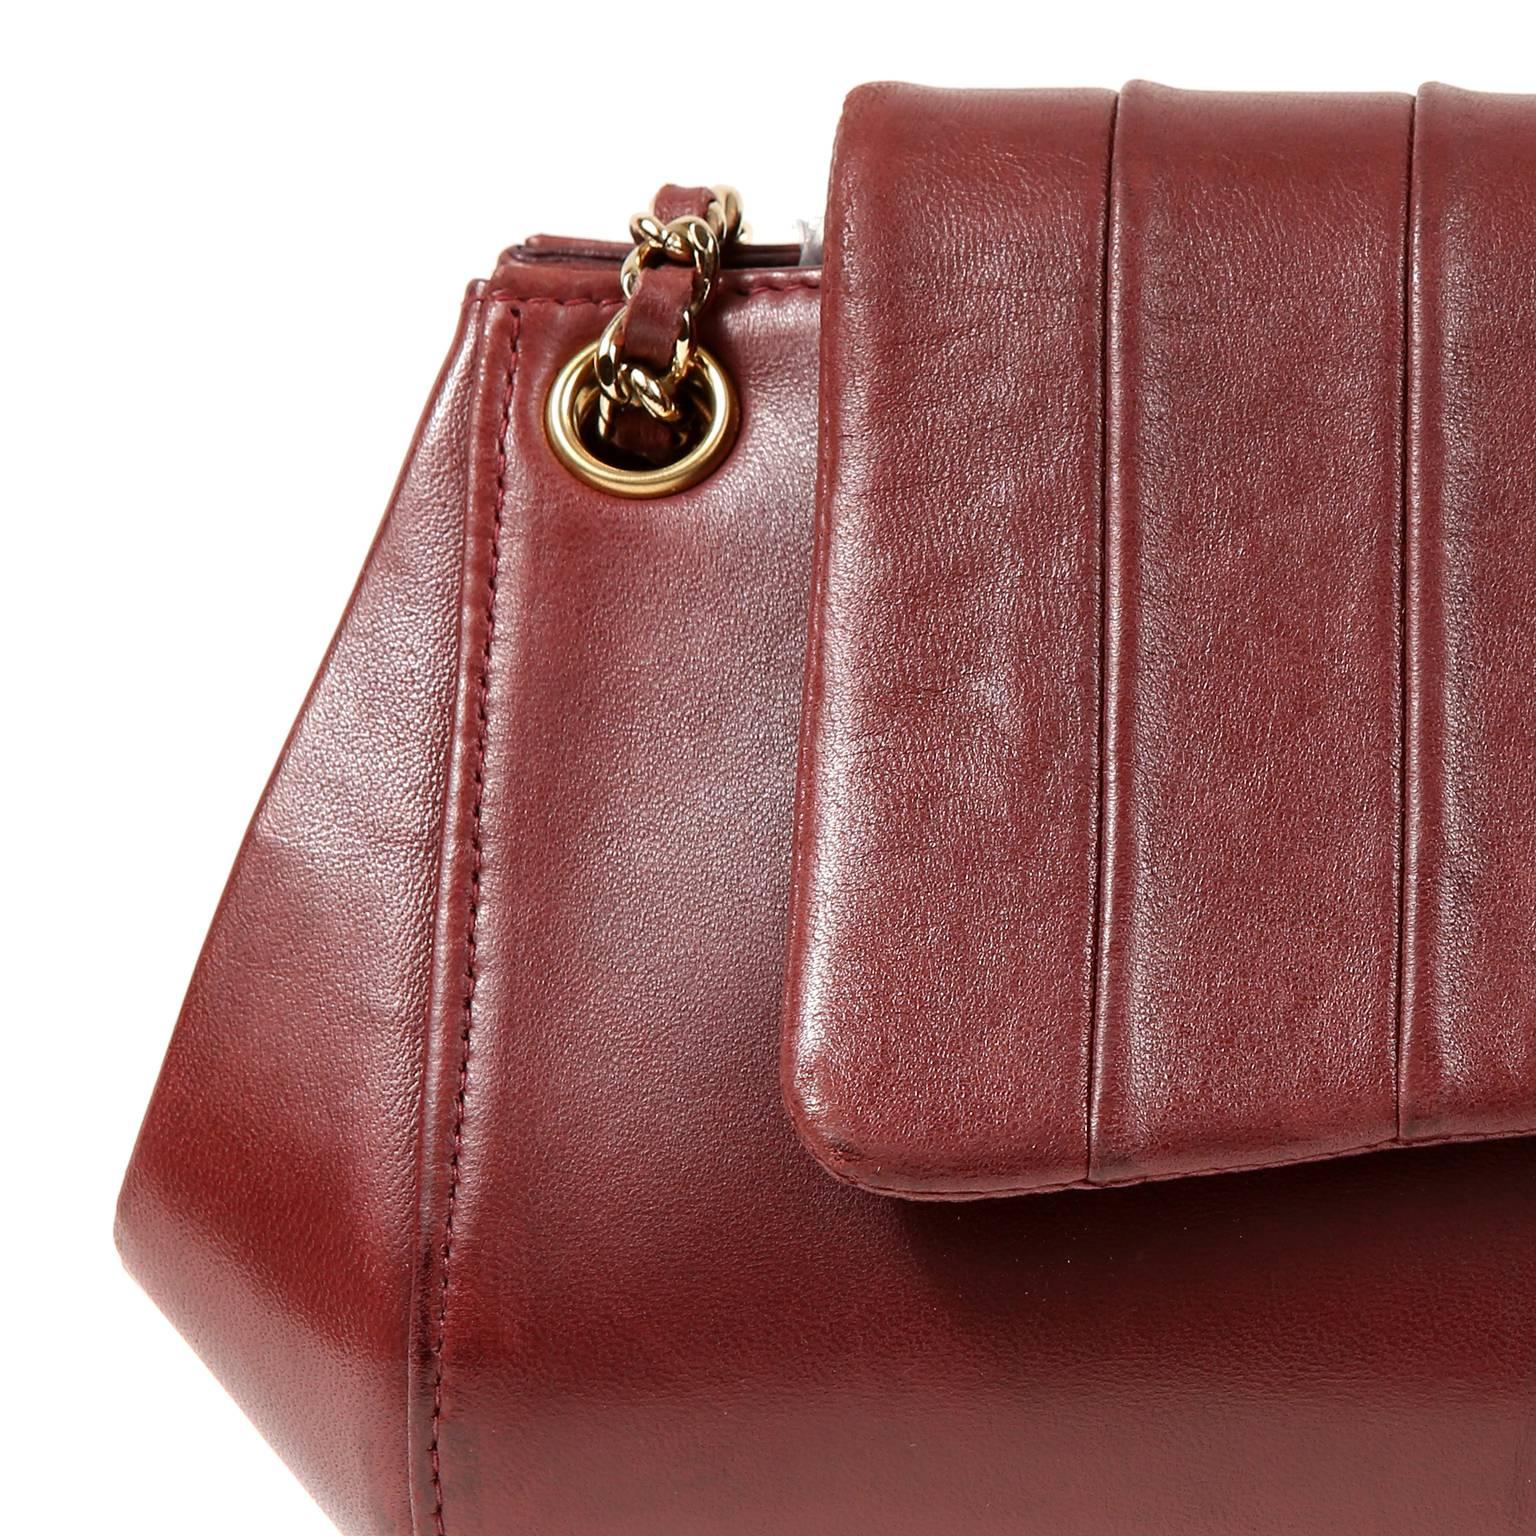 Chanel Burgundy Leather  Accordion Flap Bag For Sale 1